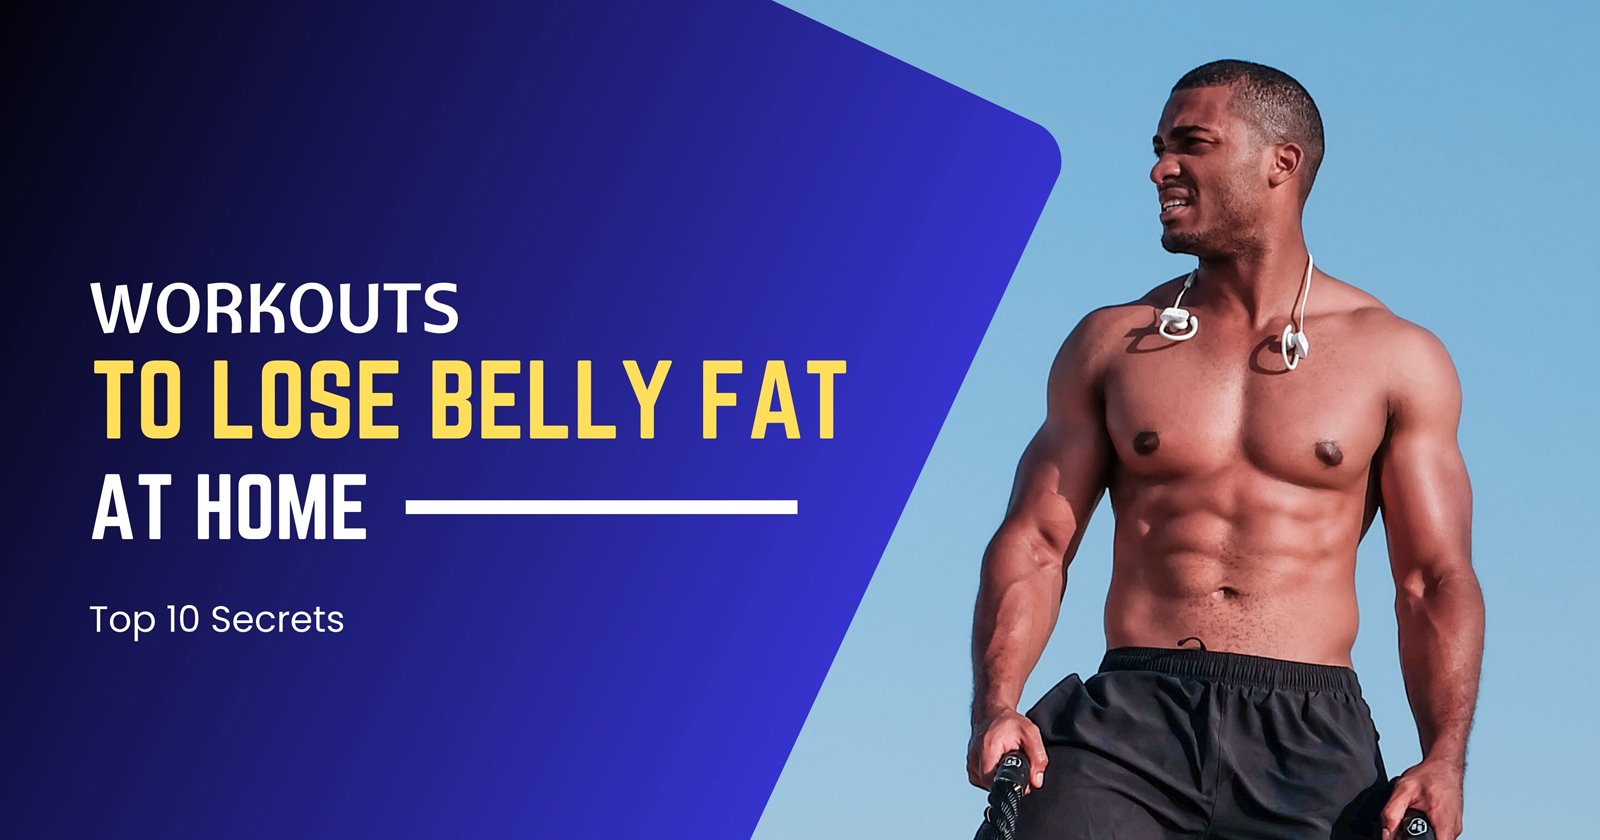 Workouts to Lose Belly Fat